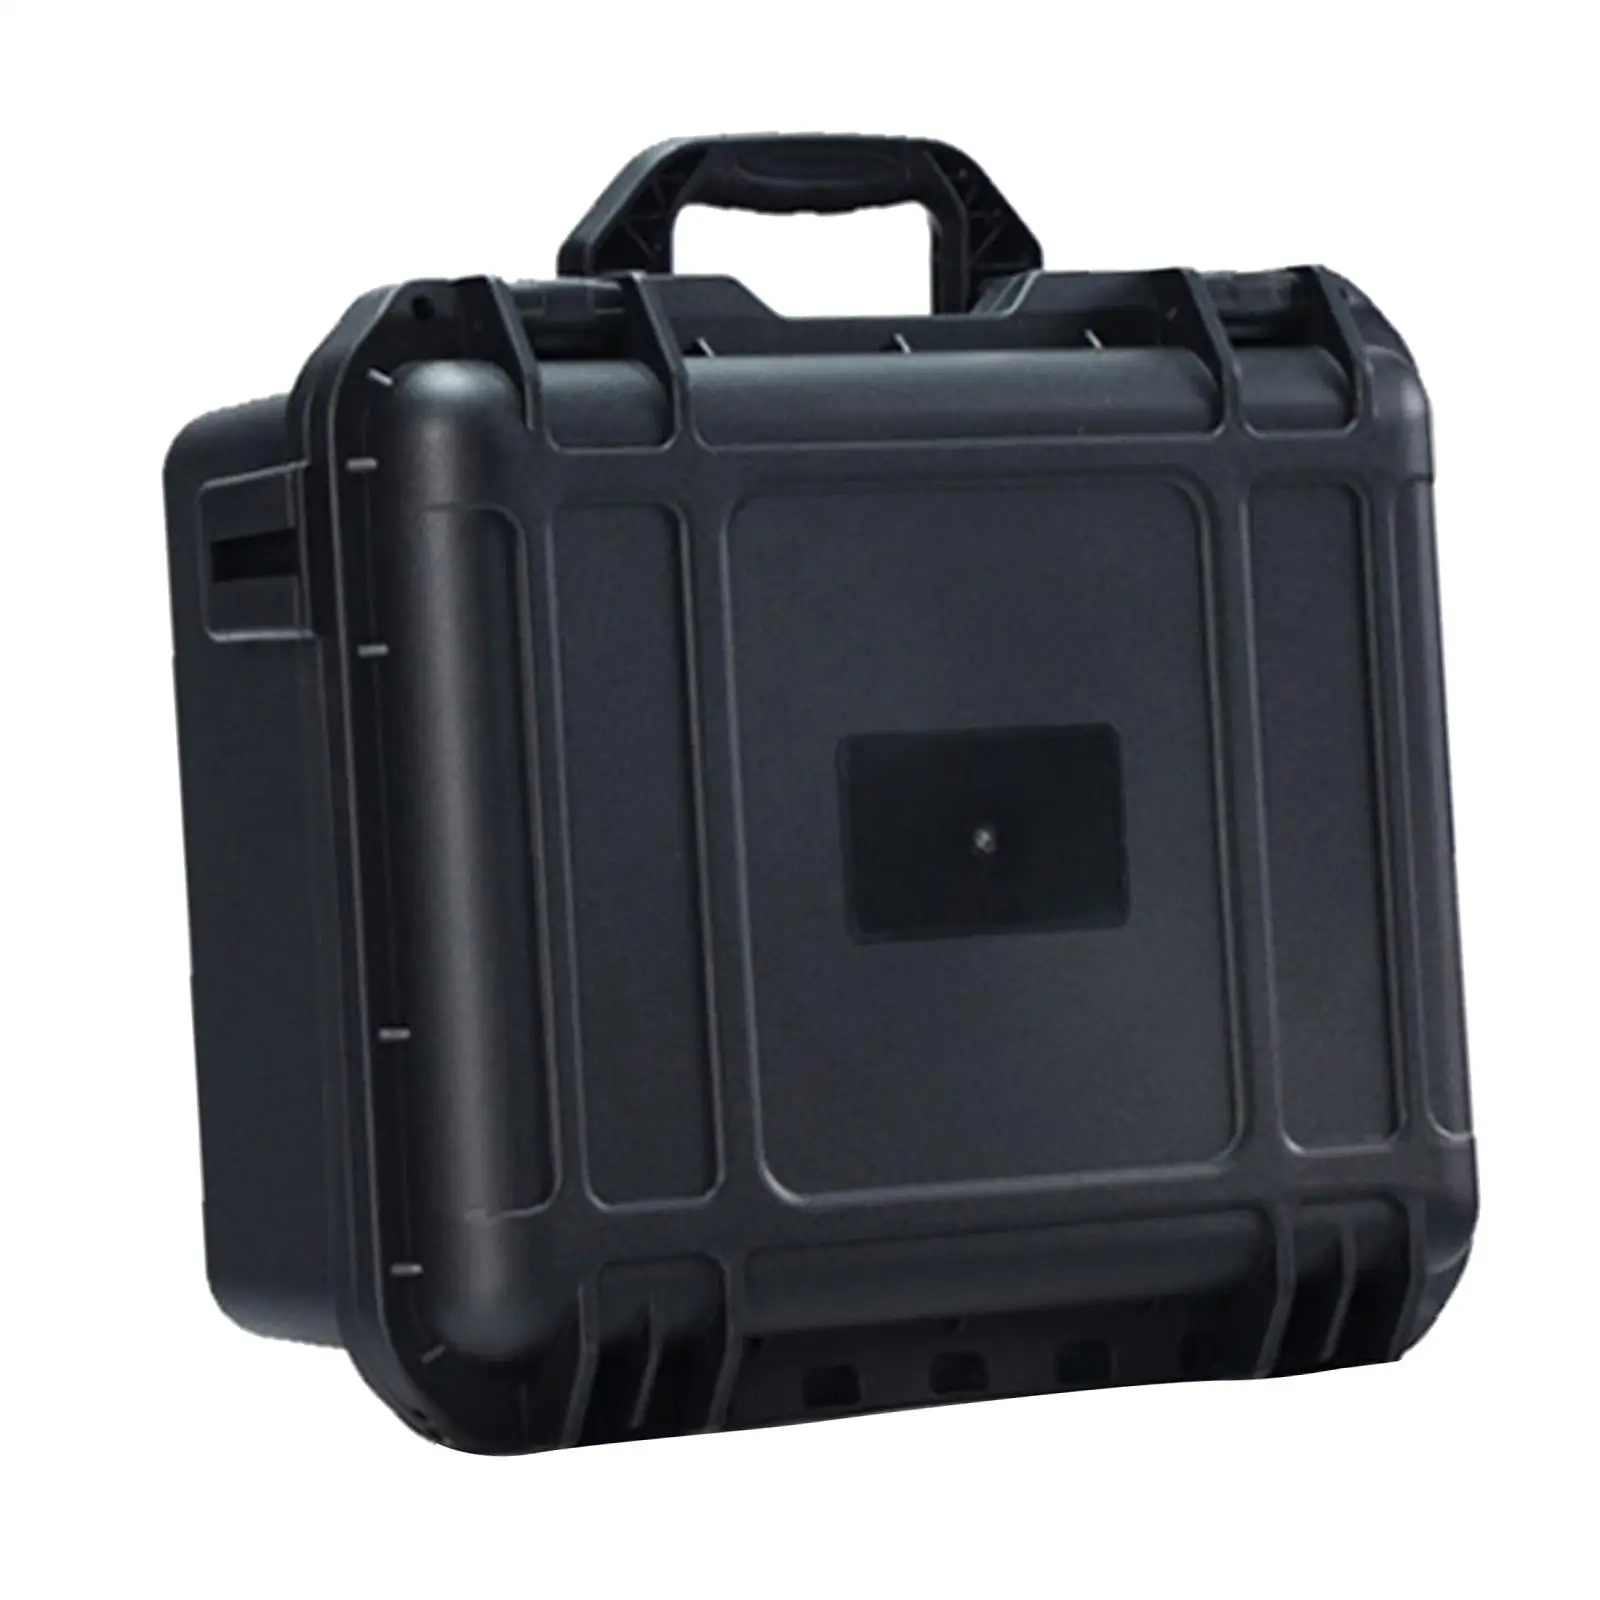 Travel Drone Carrying Case Travel Case Storage Box Suitcaseg Shockproof Storage Bag for DJI Mini 3 Pro Protector Parts